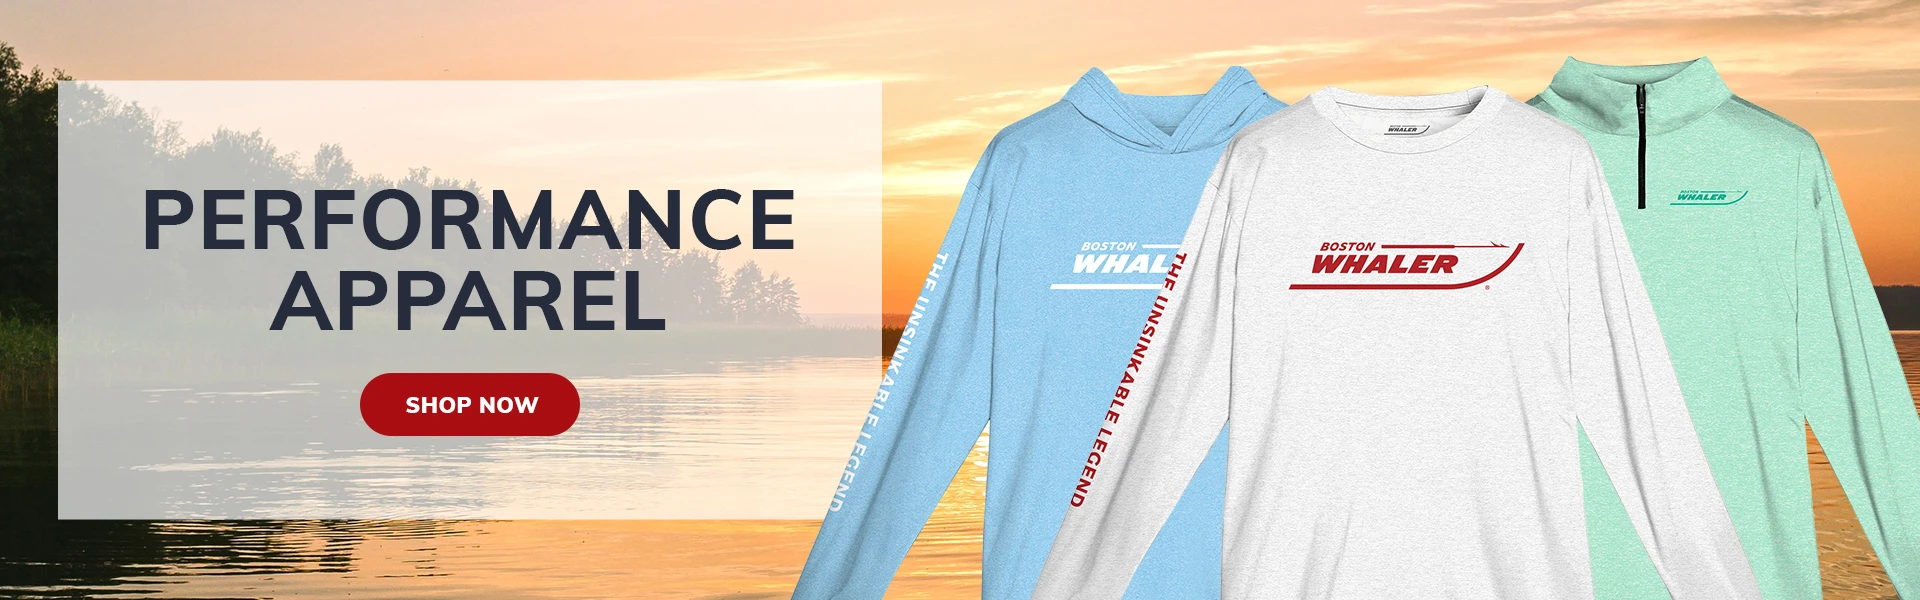 Performance apparel now available